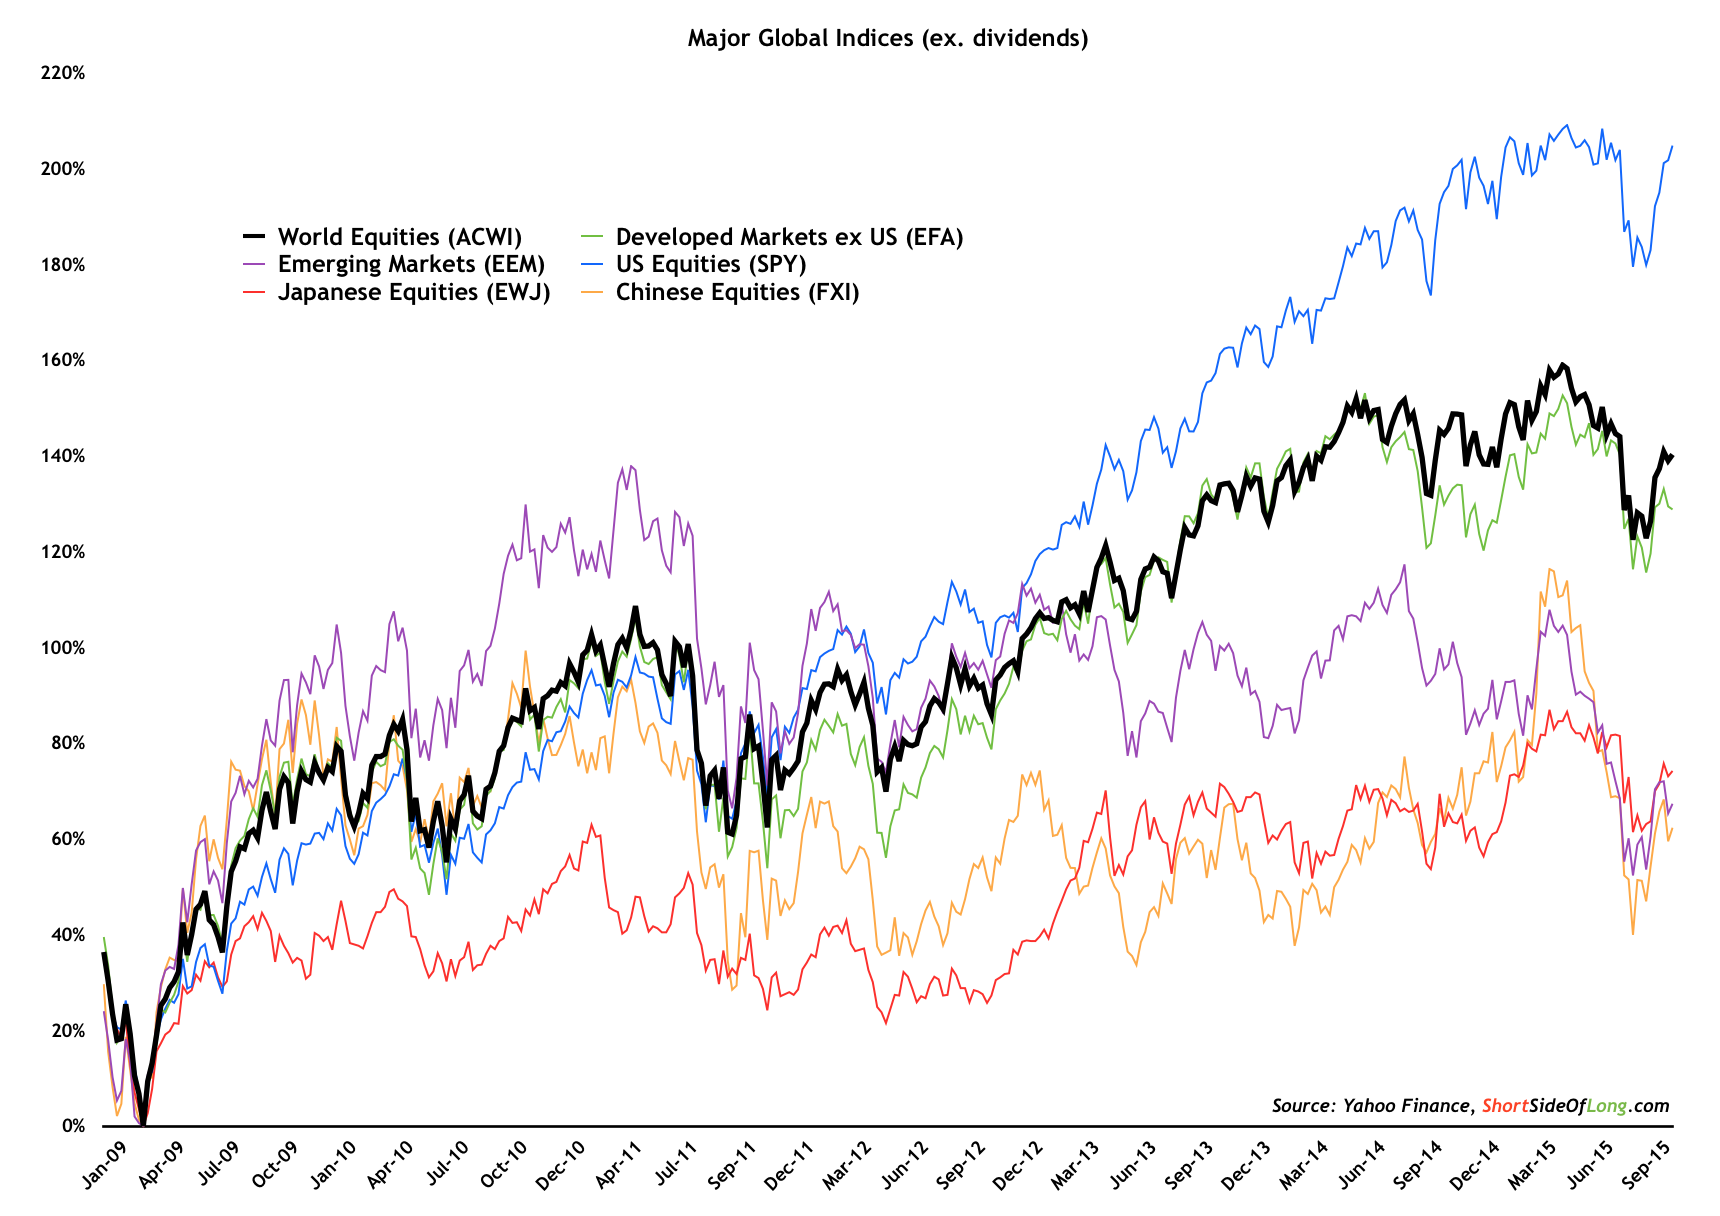 Major Global Indices 2009-2015